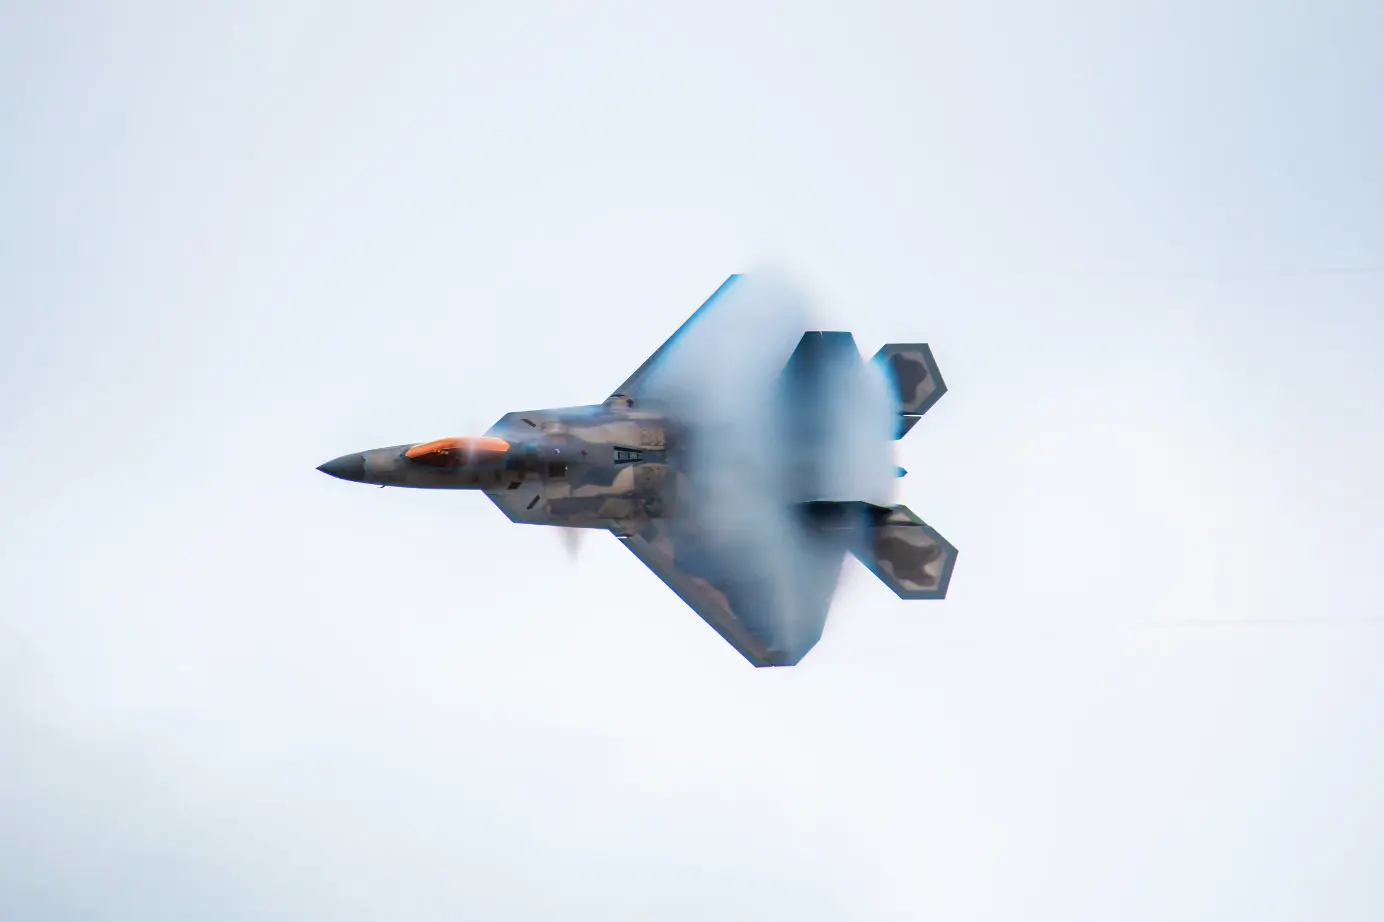 Only the US has the F-22 Raptor